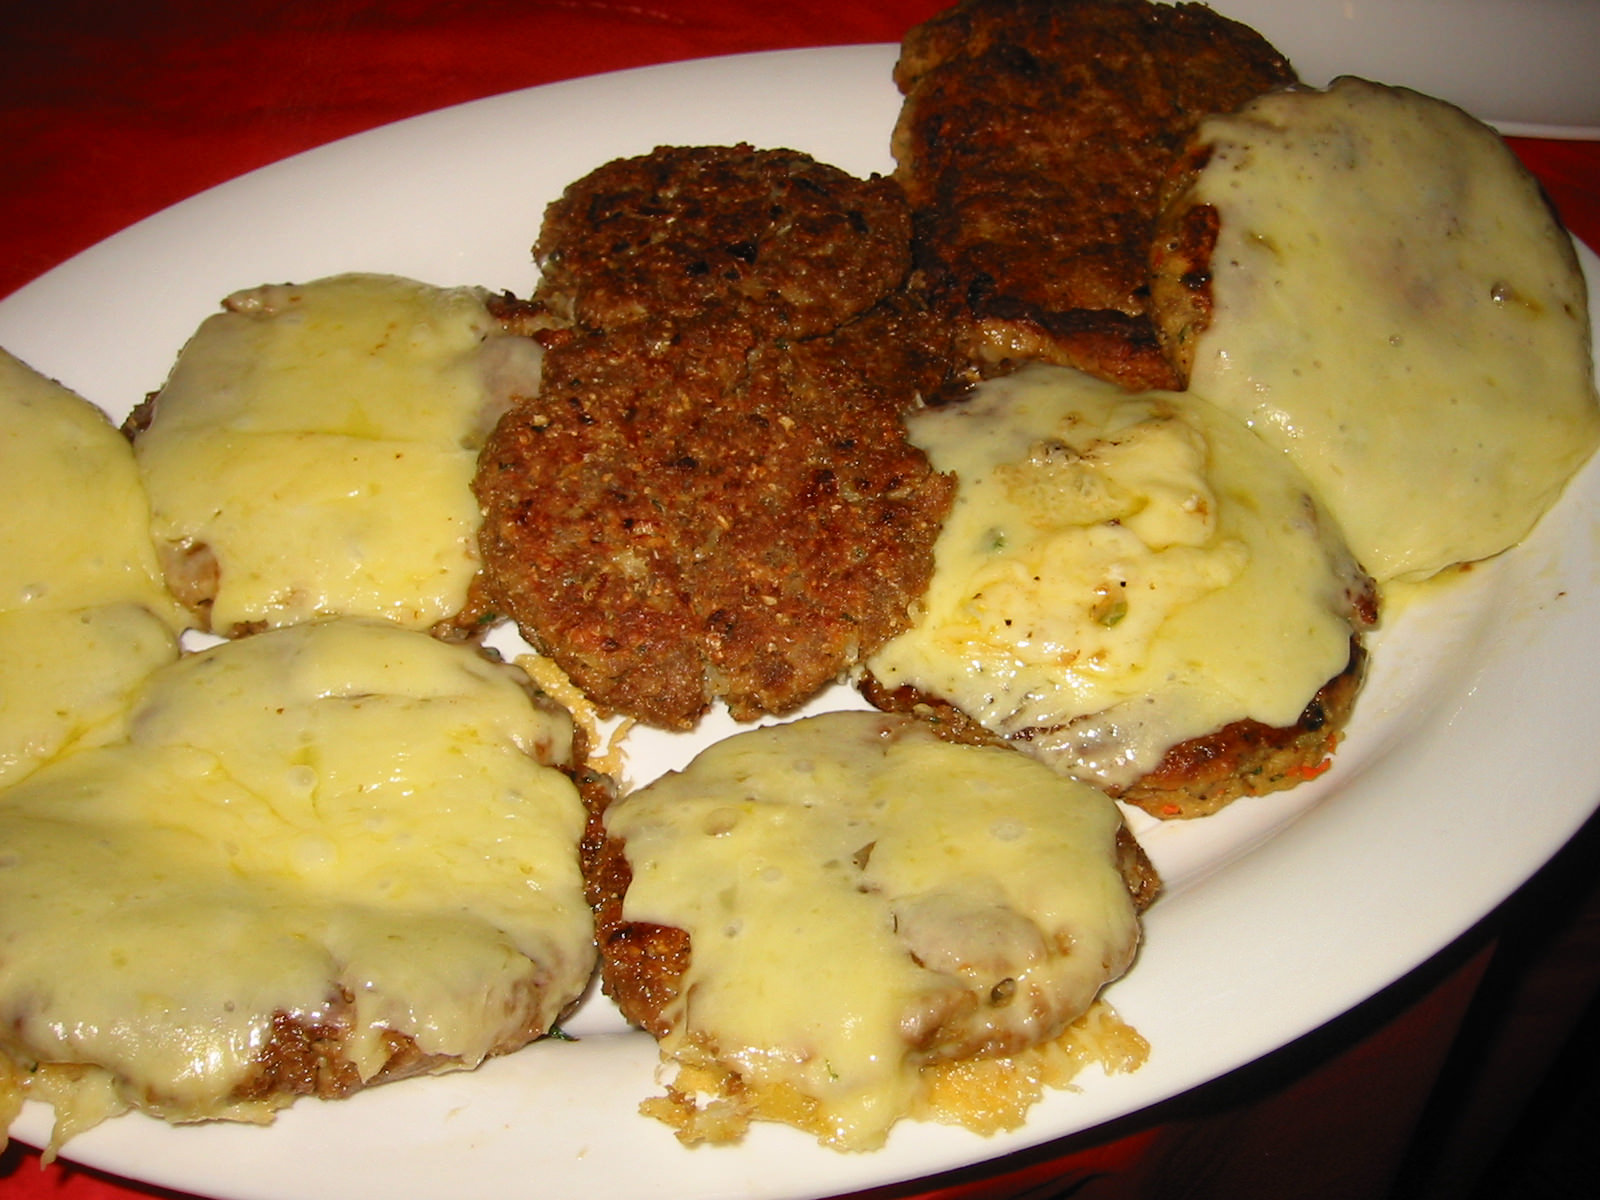 Burger patties, some with cheese, some vegetarian